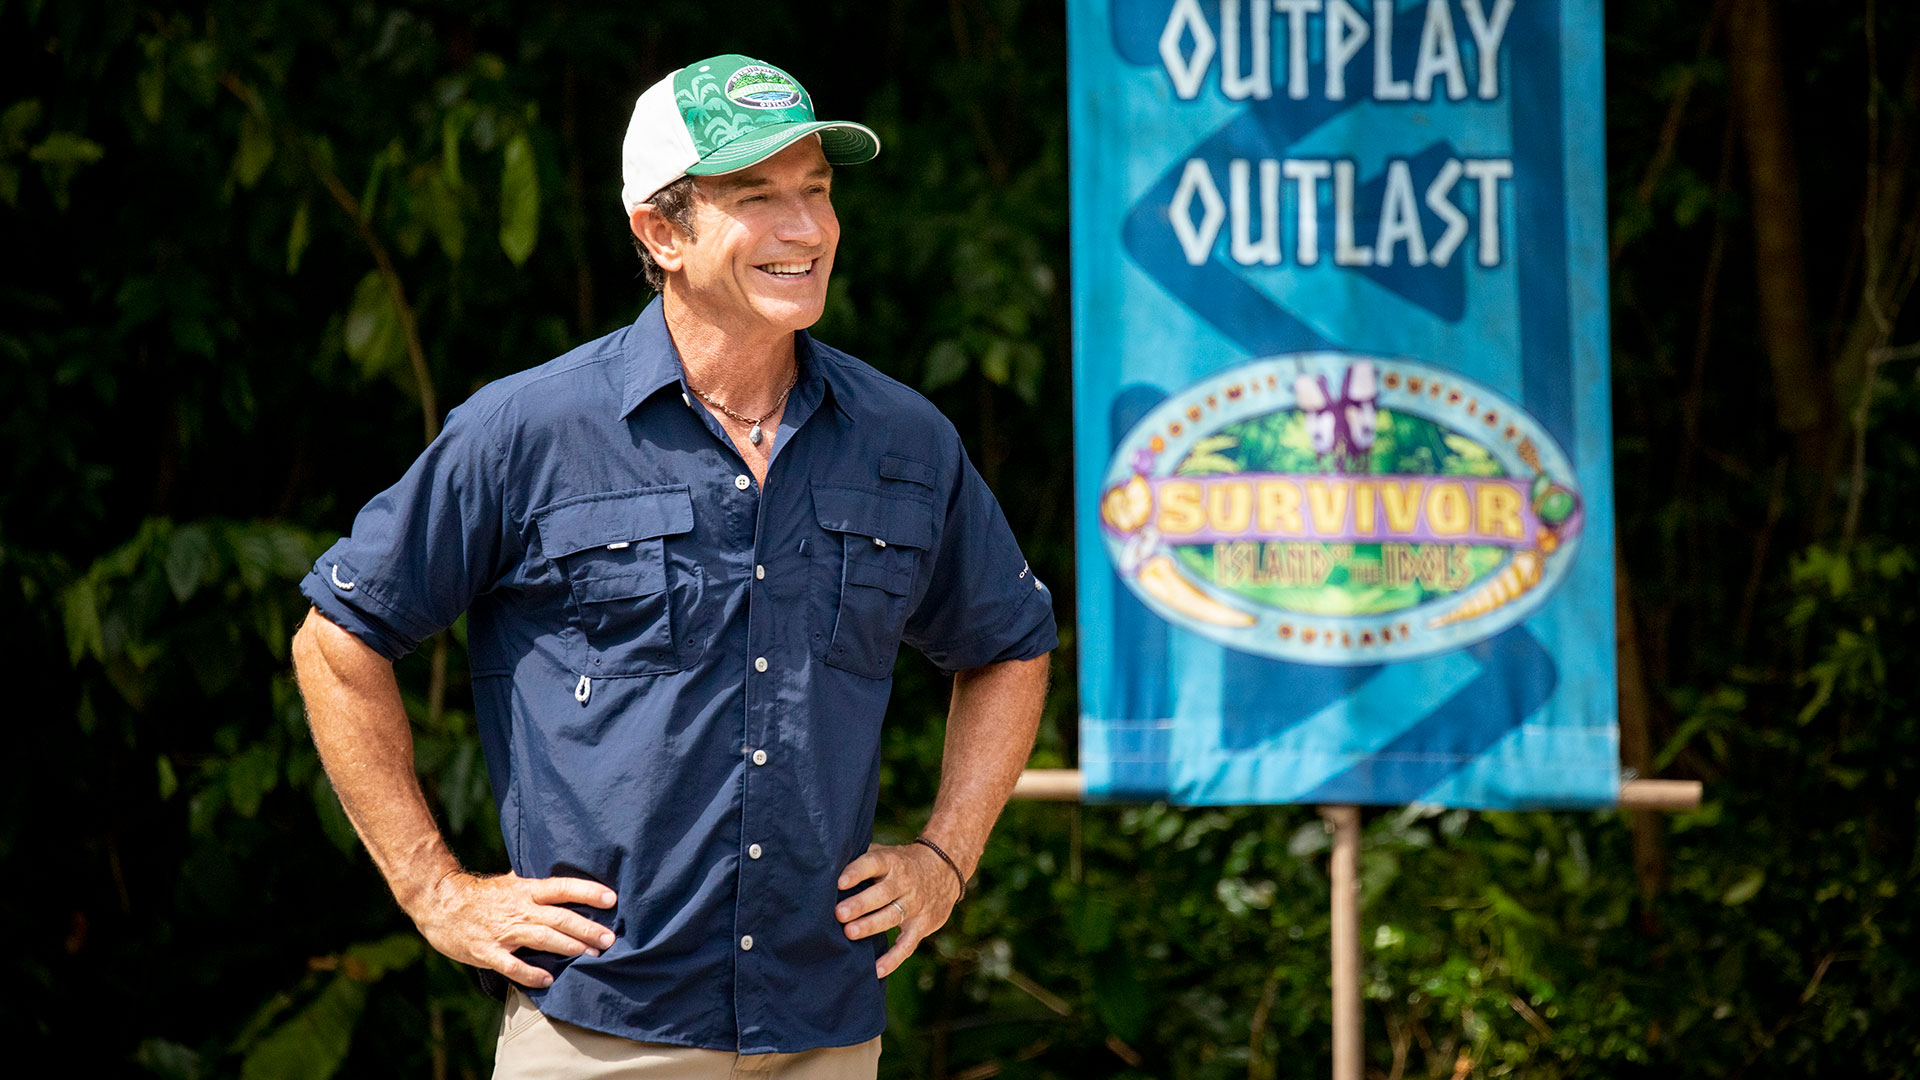 Meet the new castaways during the season premiere on Wednesday, Sept. 25 at 8/7c!